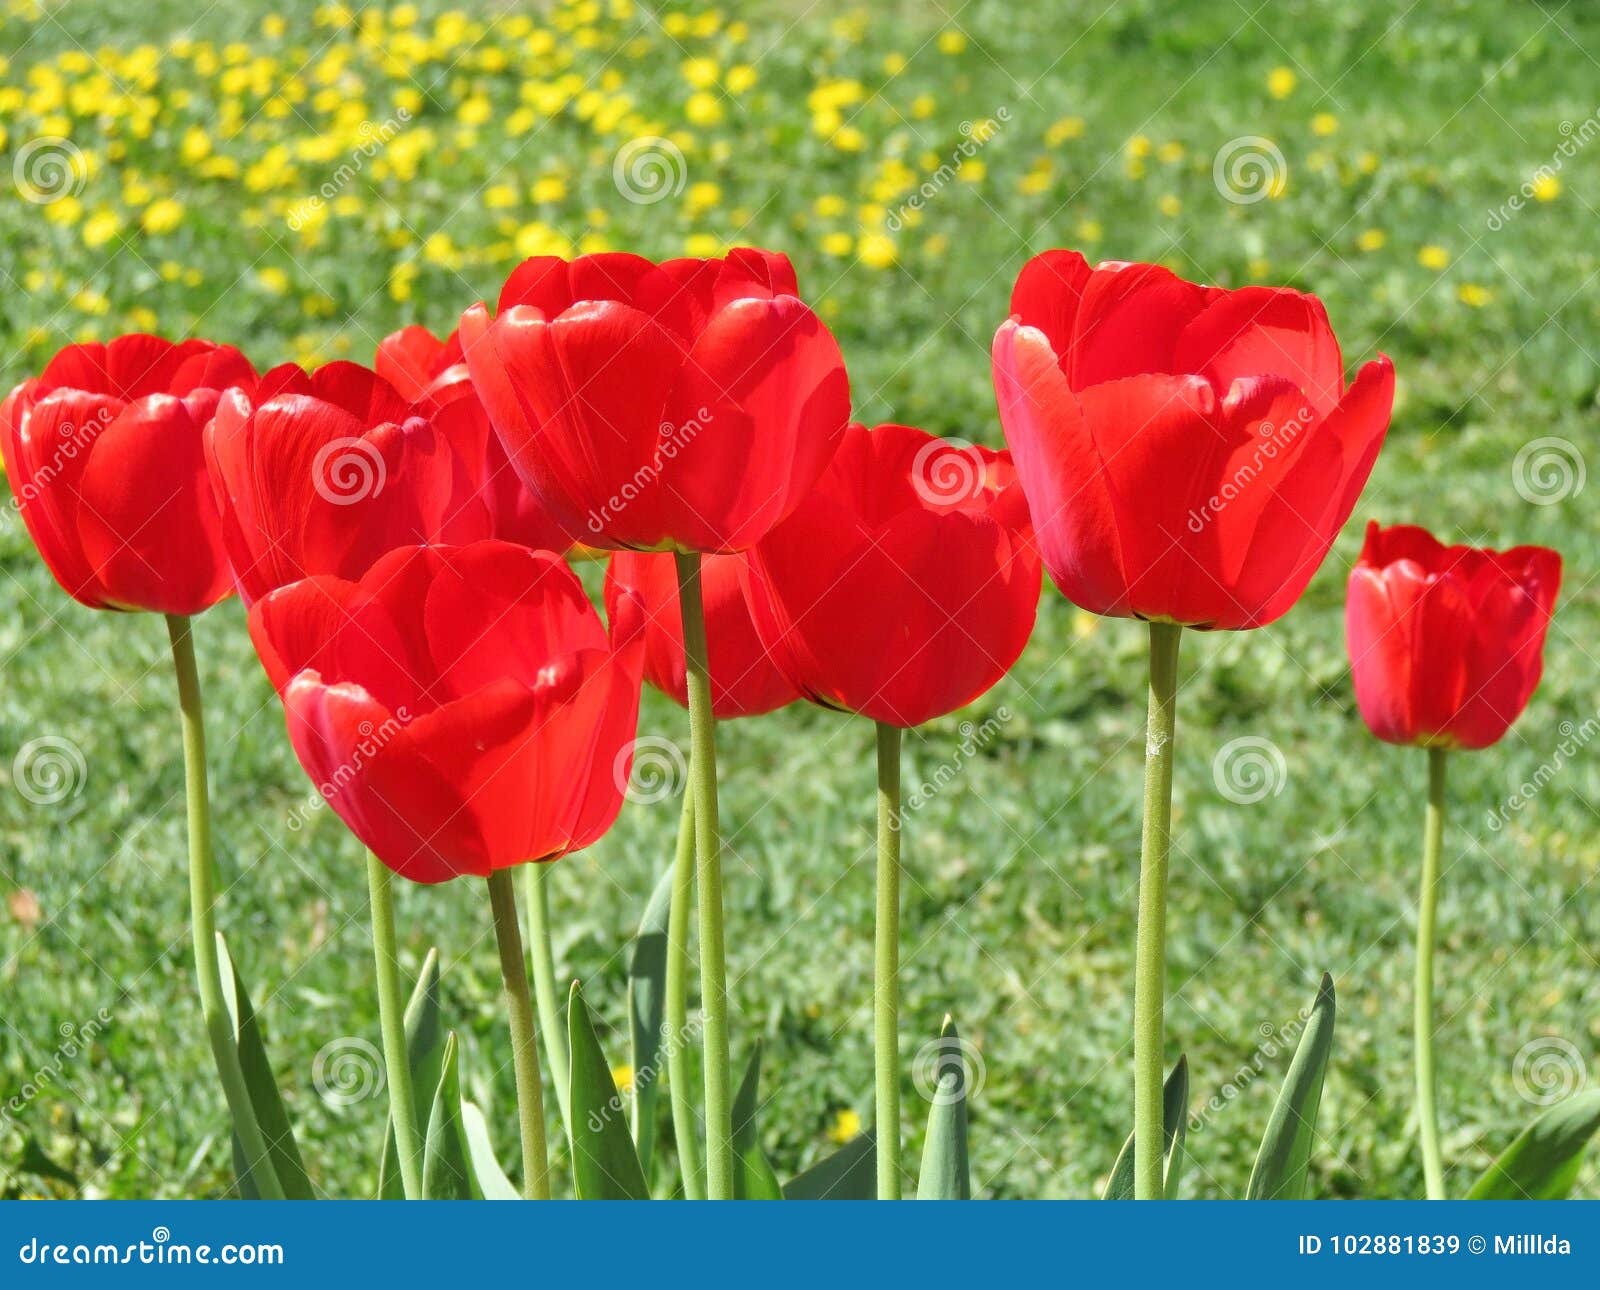 Red Beautiful Tulip Flowers Stock Image Image Of Floral Nice 102881839